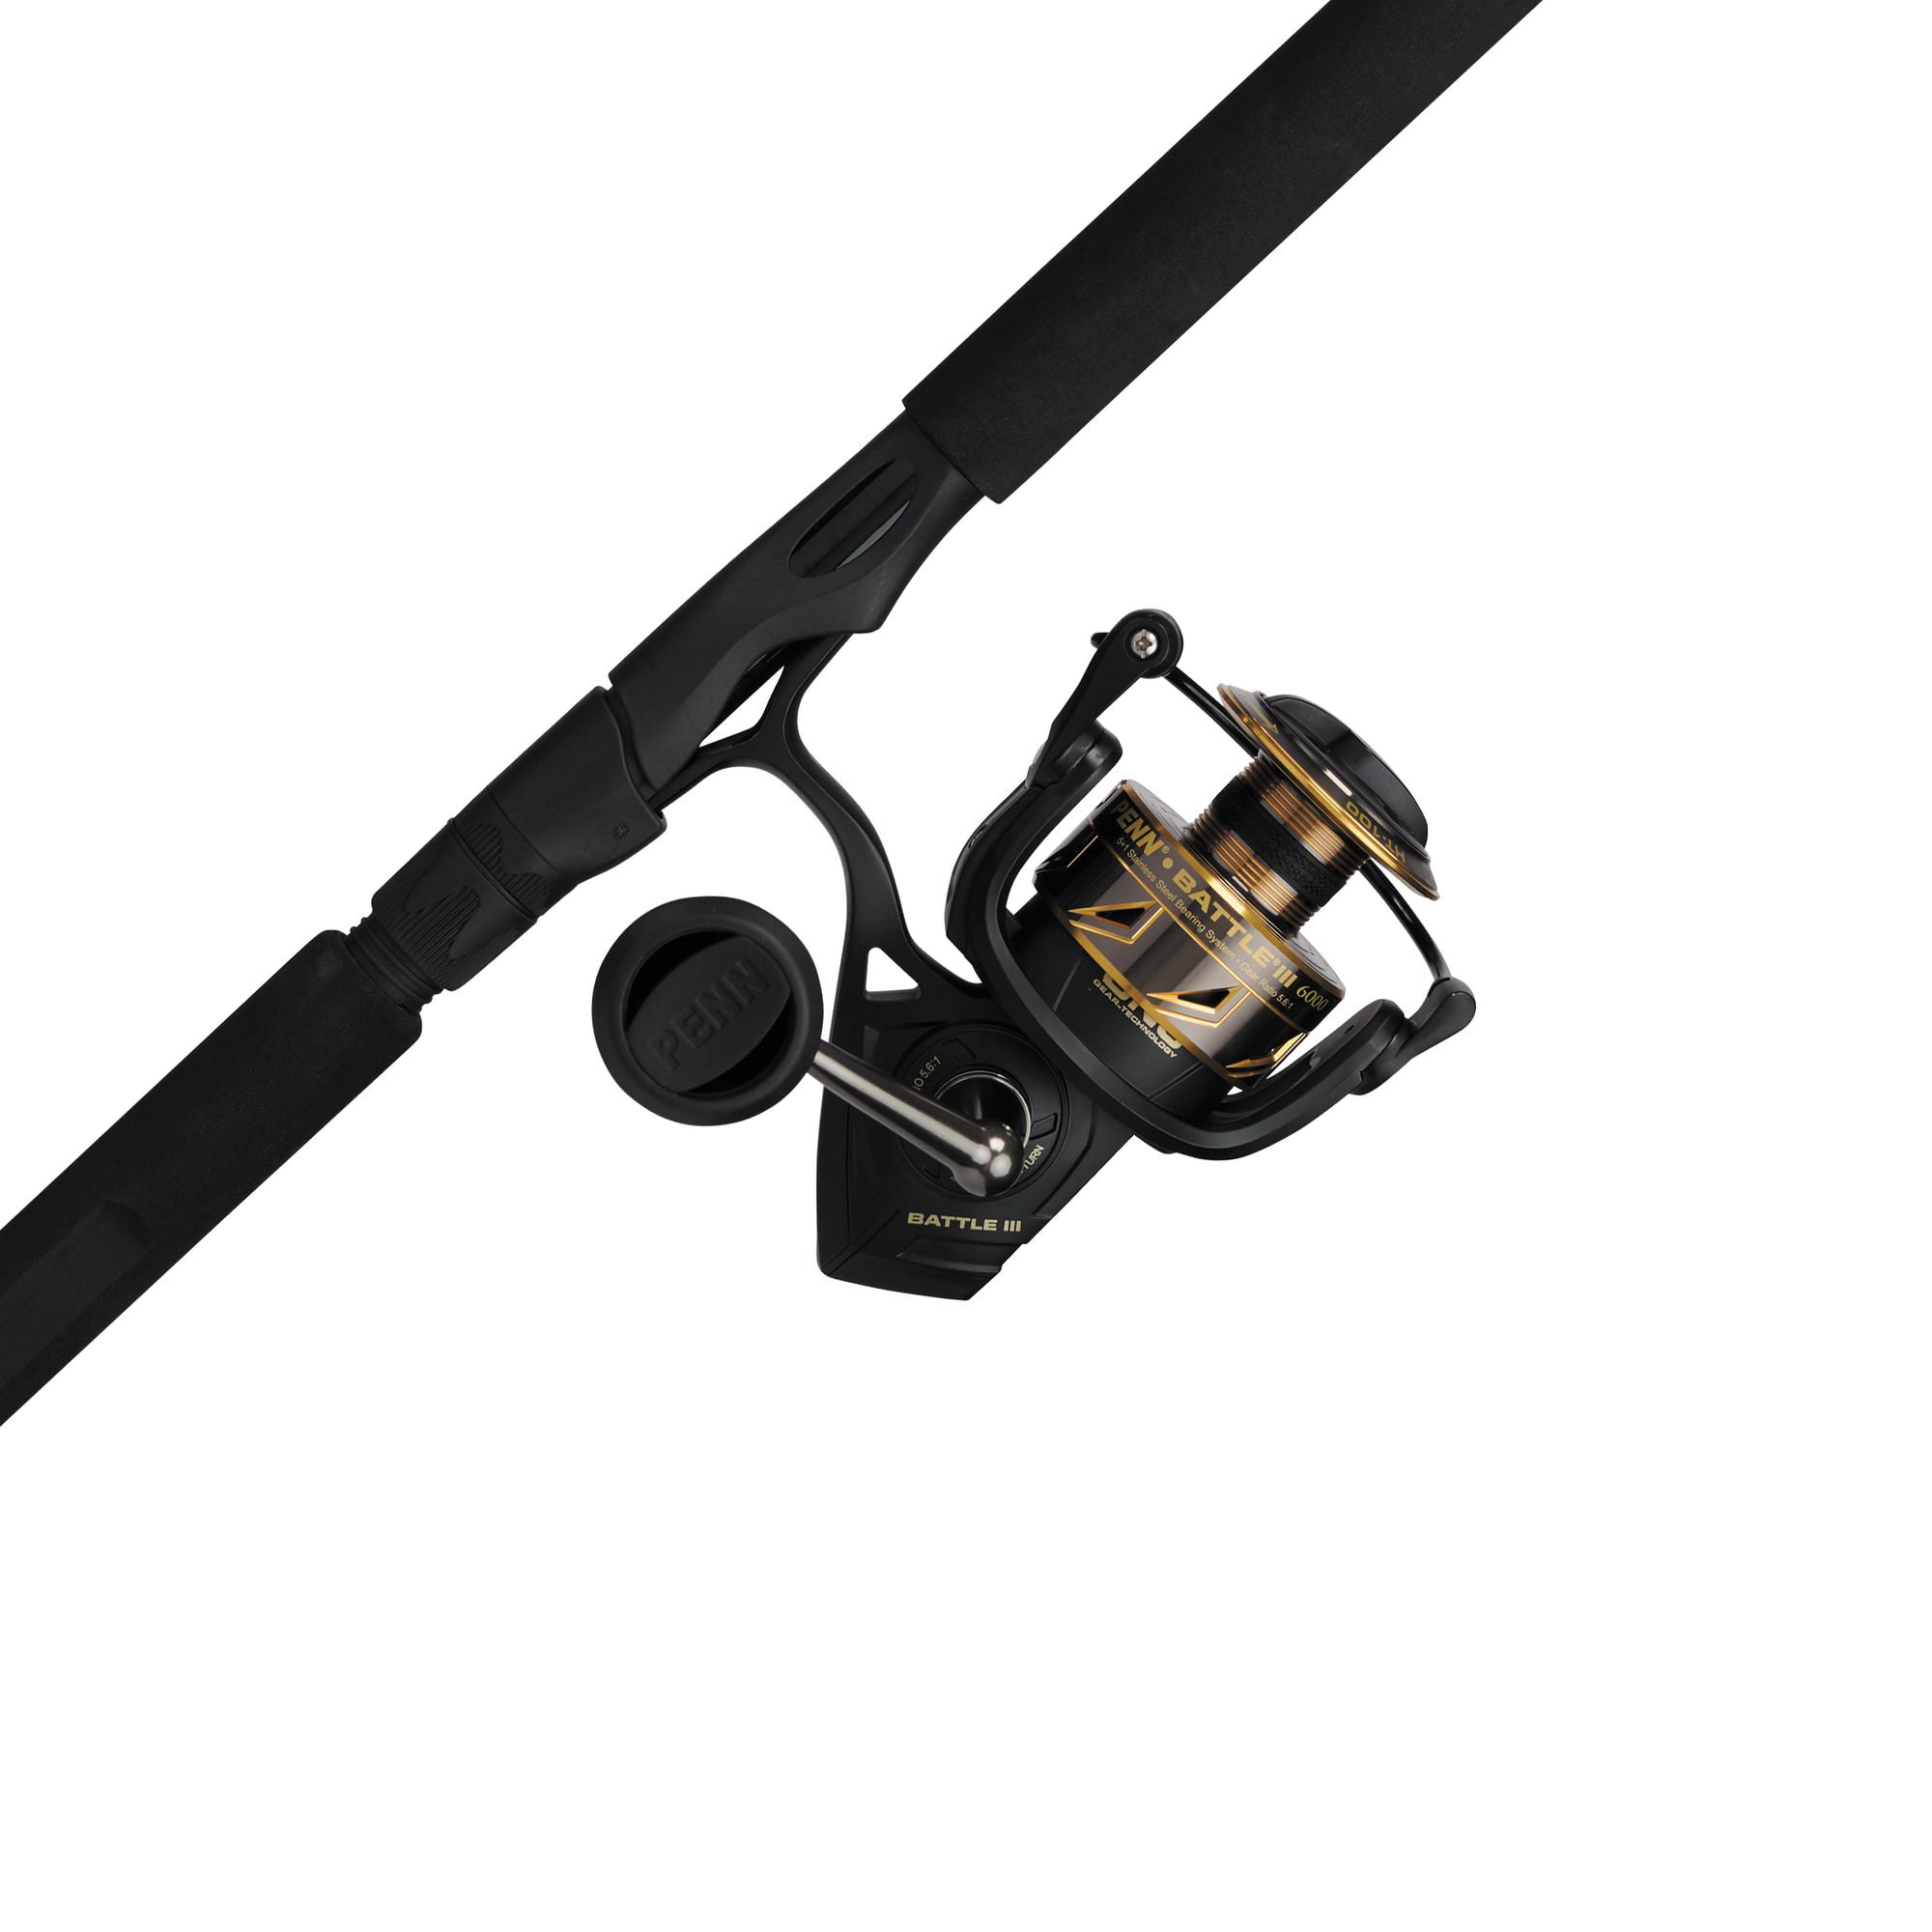 Abu Garcia Red Max Spinning Reel and Fishing Rod Combo, 7' - 1Pc